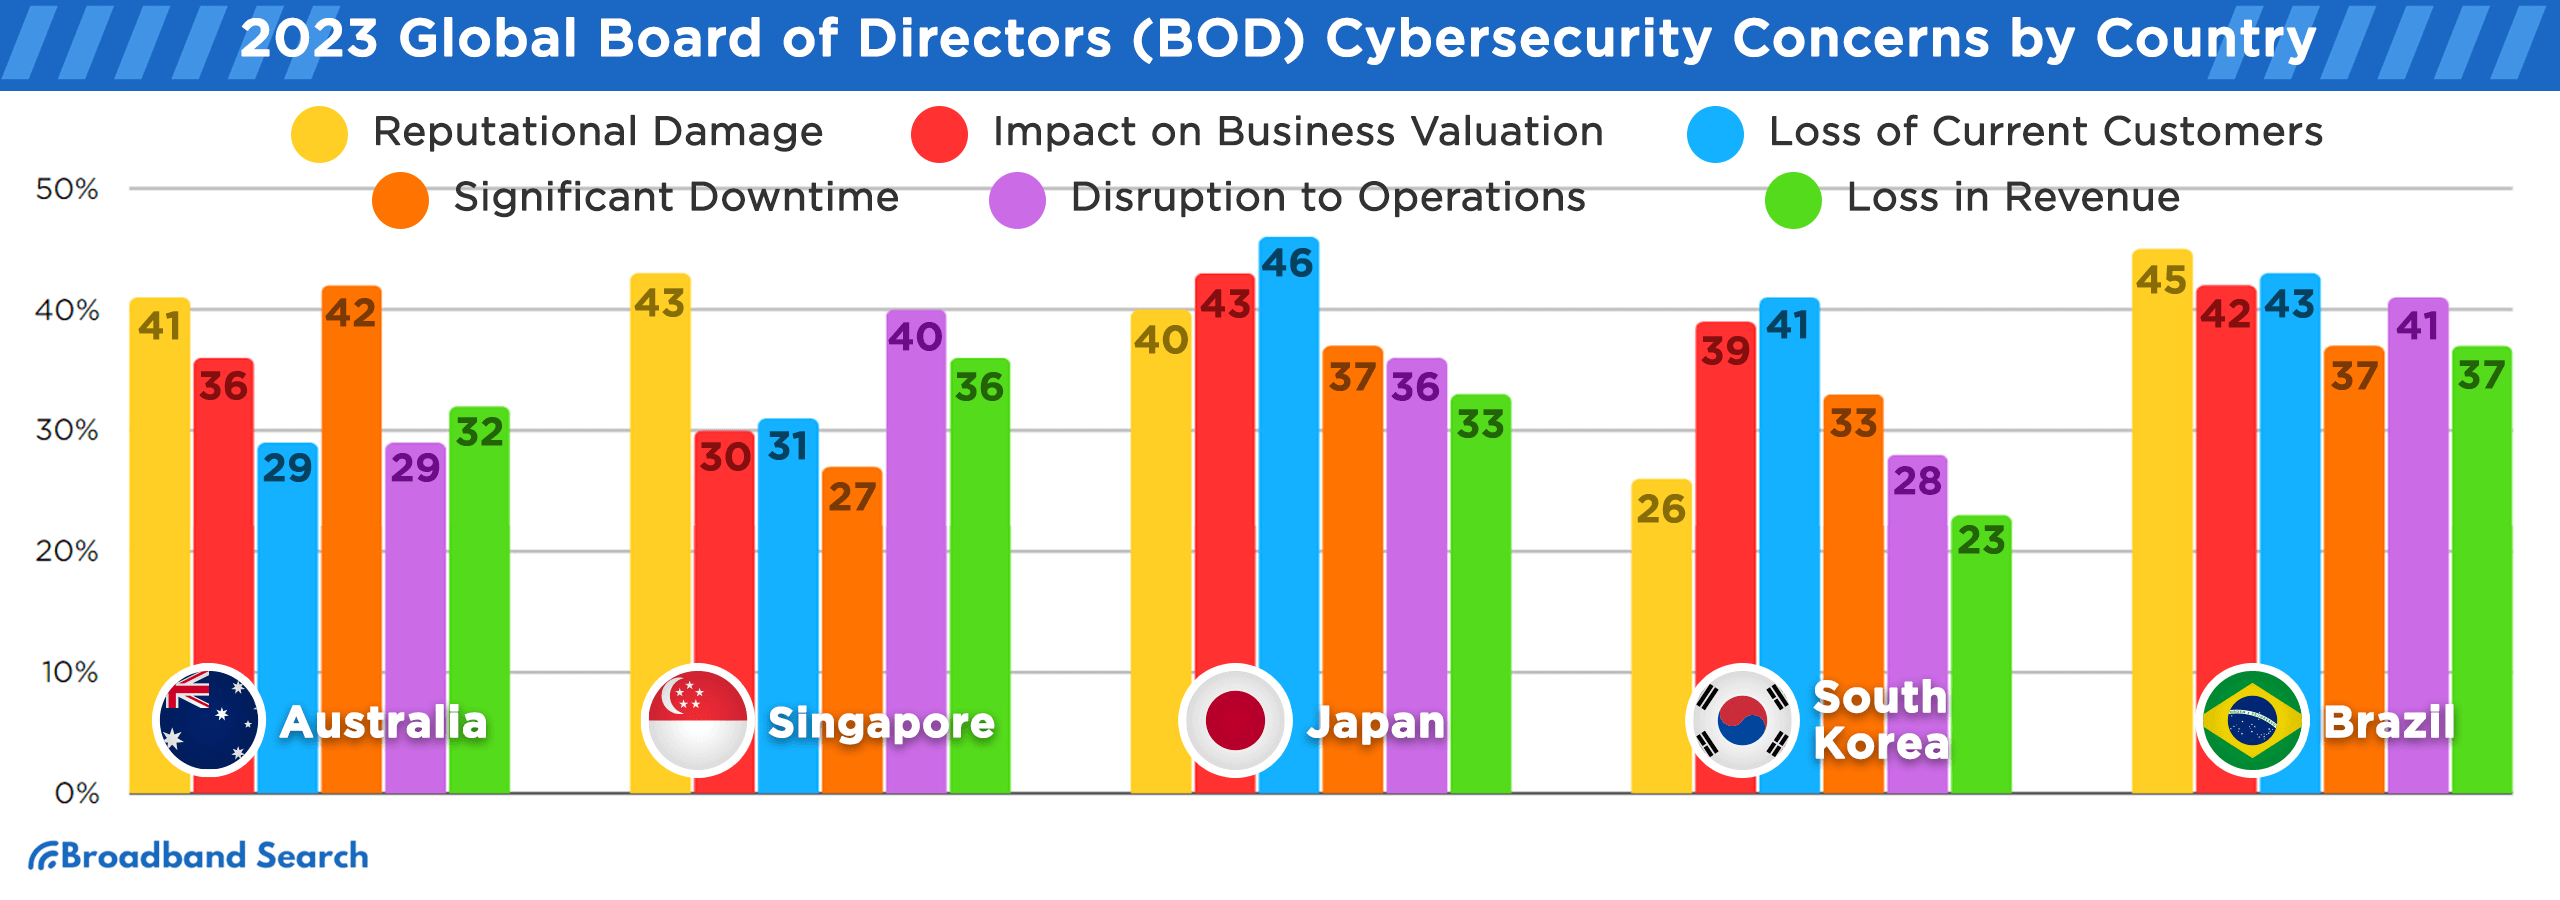 2023 global board of directors (BOD) cybersecurity concerns by country like Australia, Singapore, Japan, South Korea, Brazil